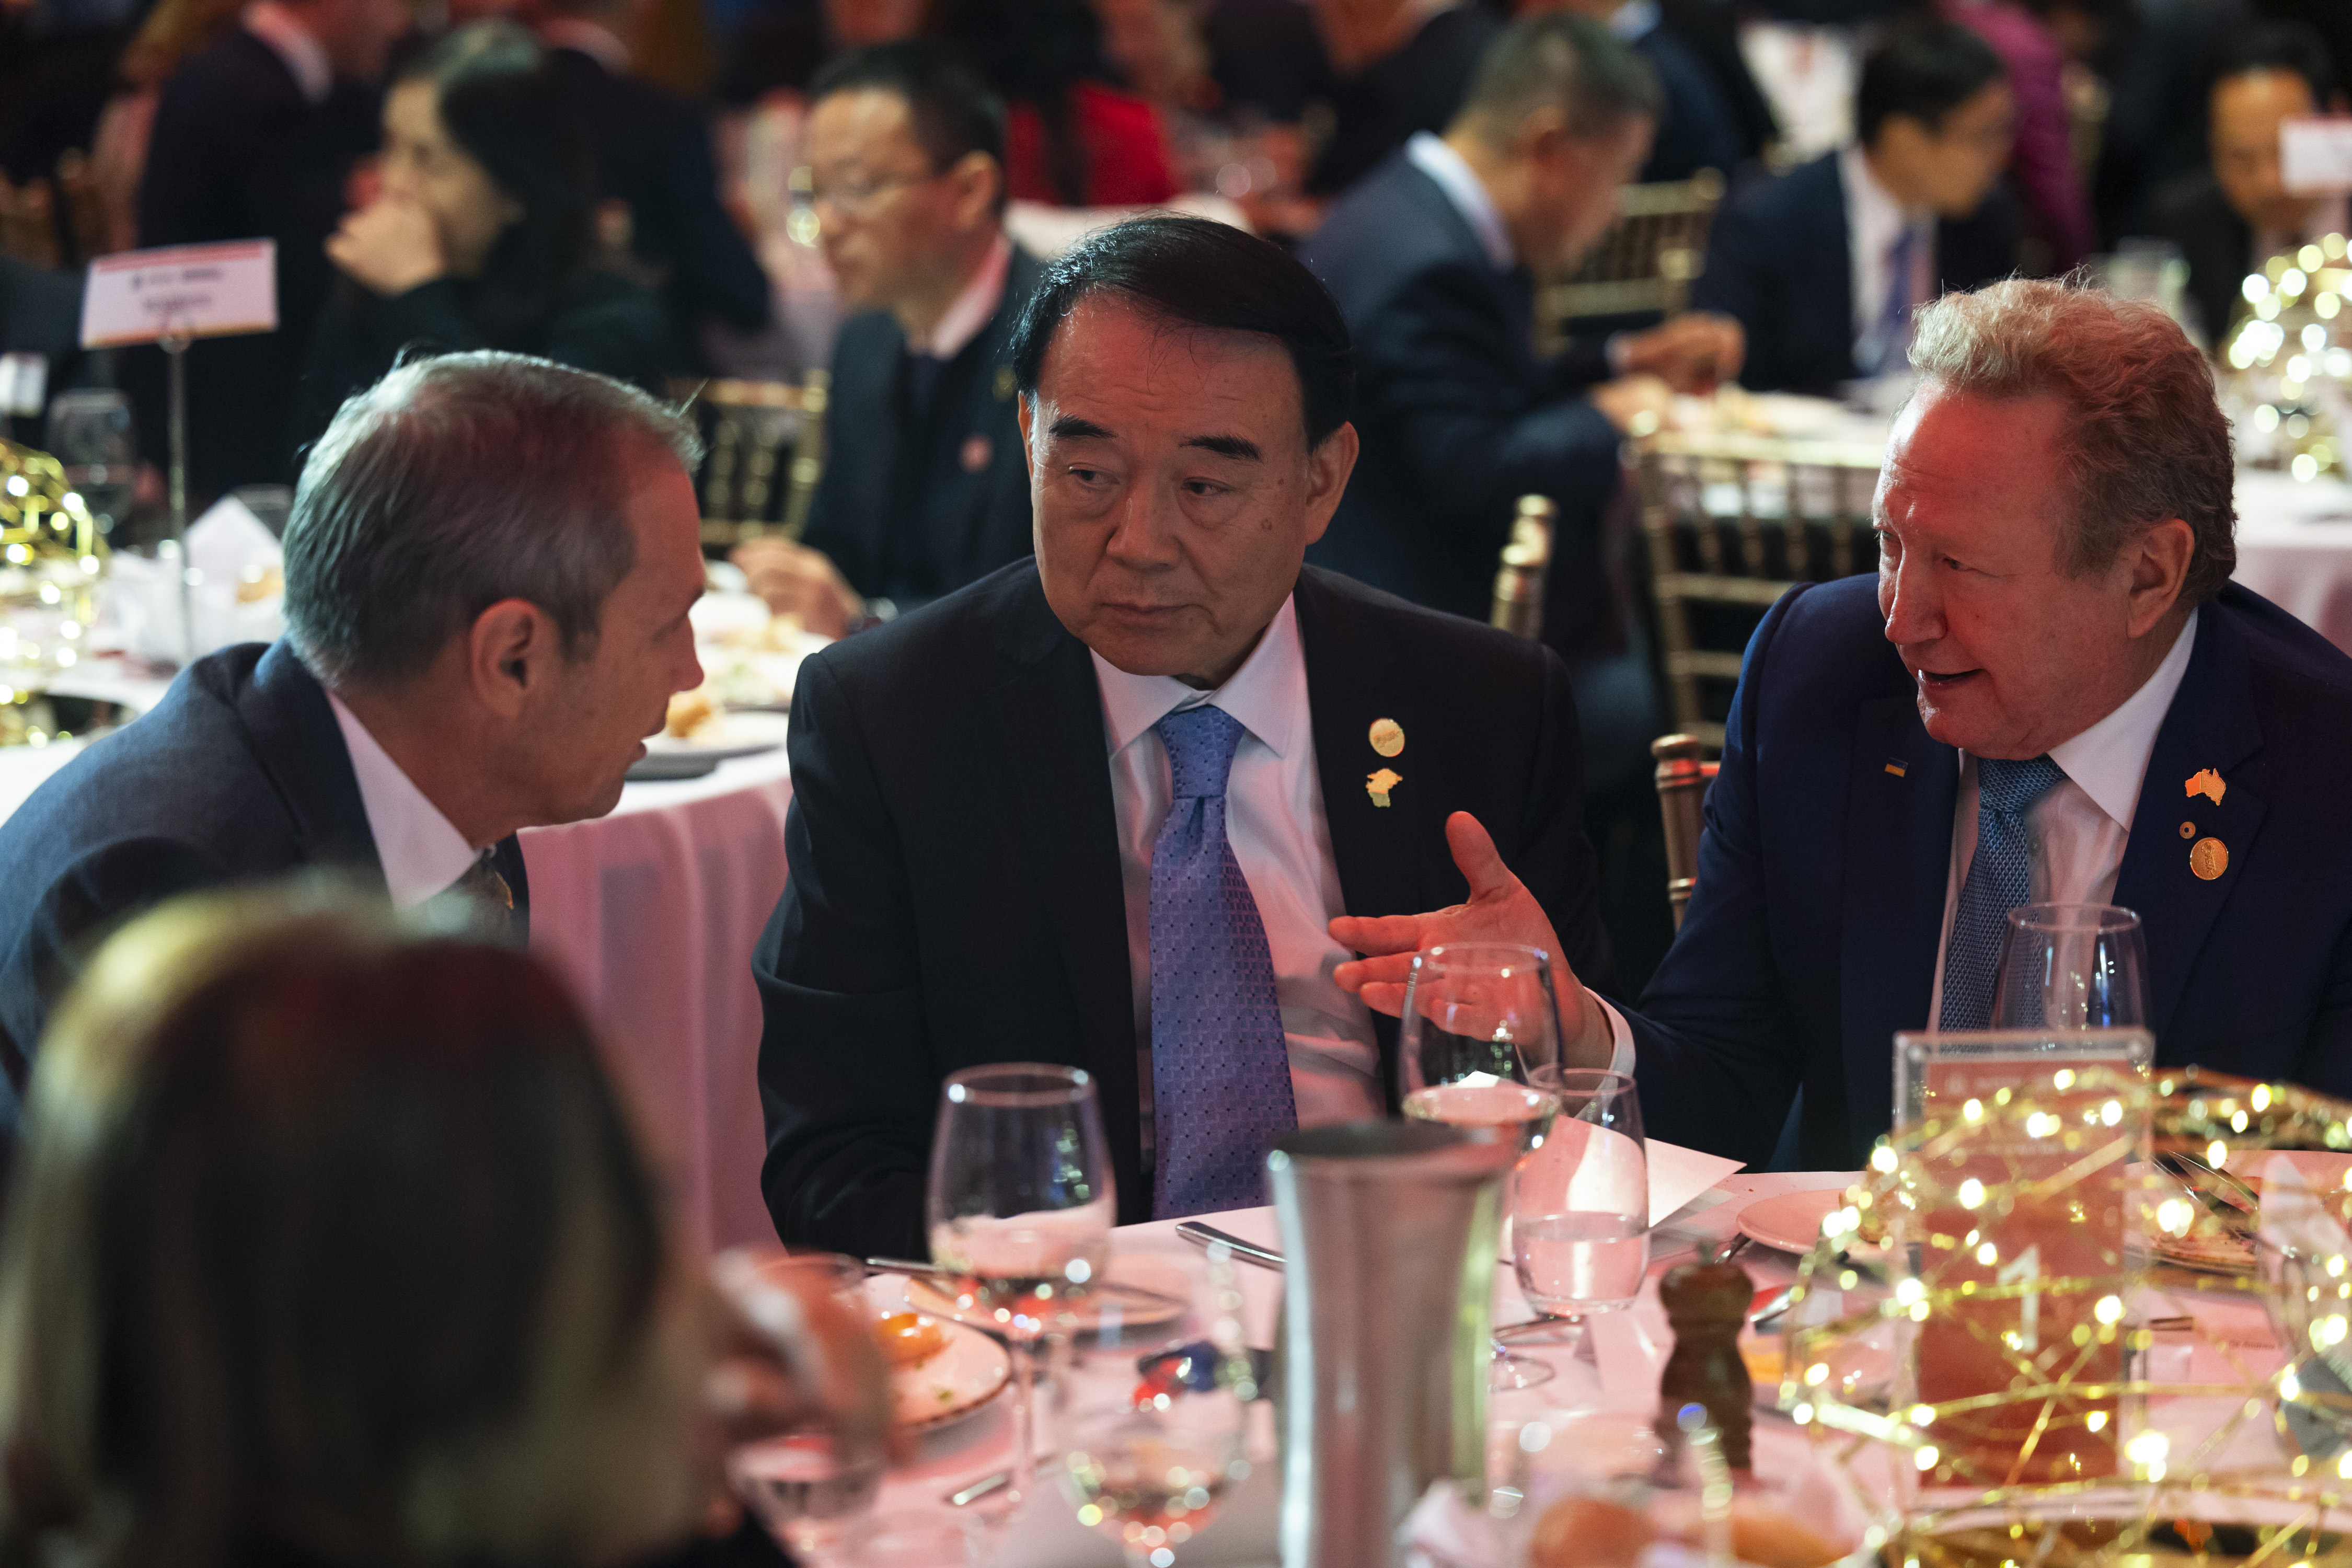 Premier Cook, Secretary General Li Baodong and Dr Andrew Forrest AO talking at a table